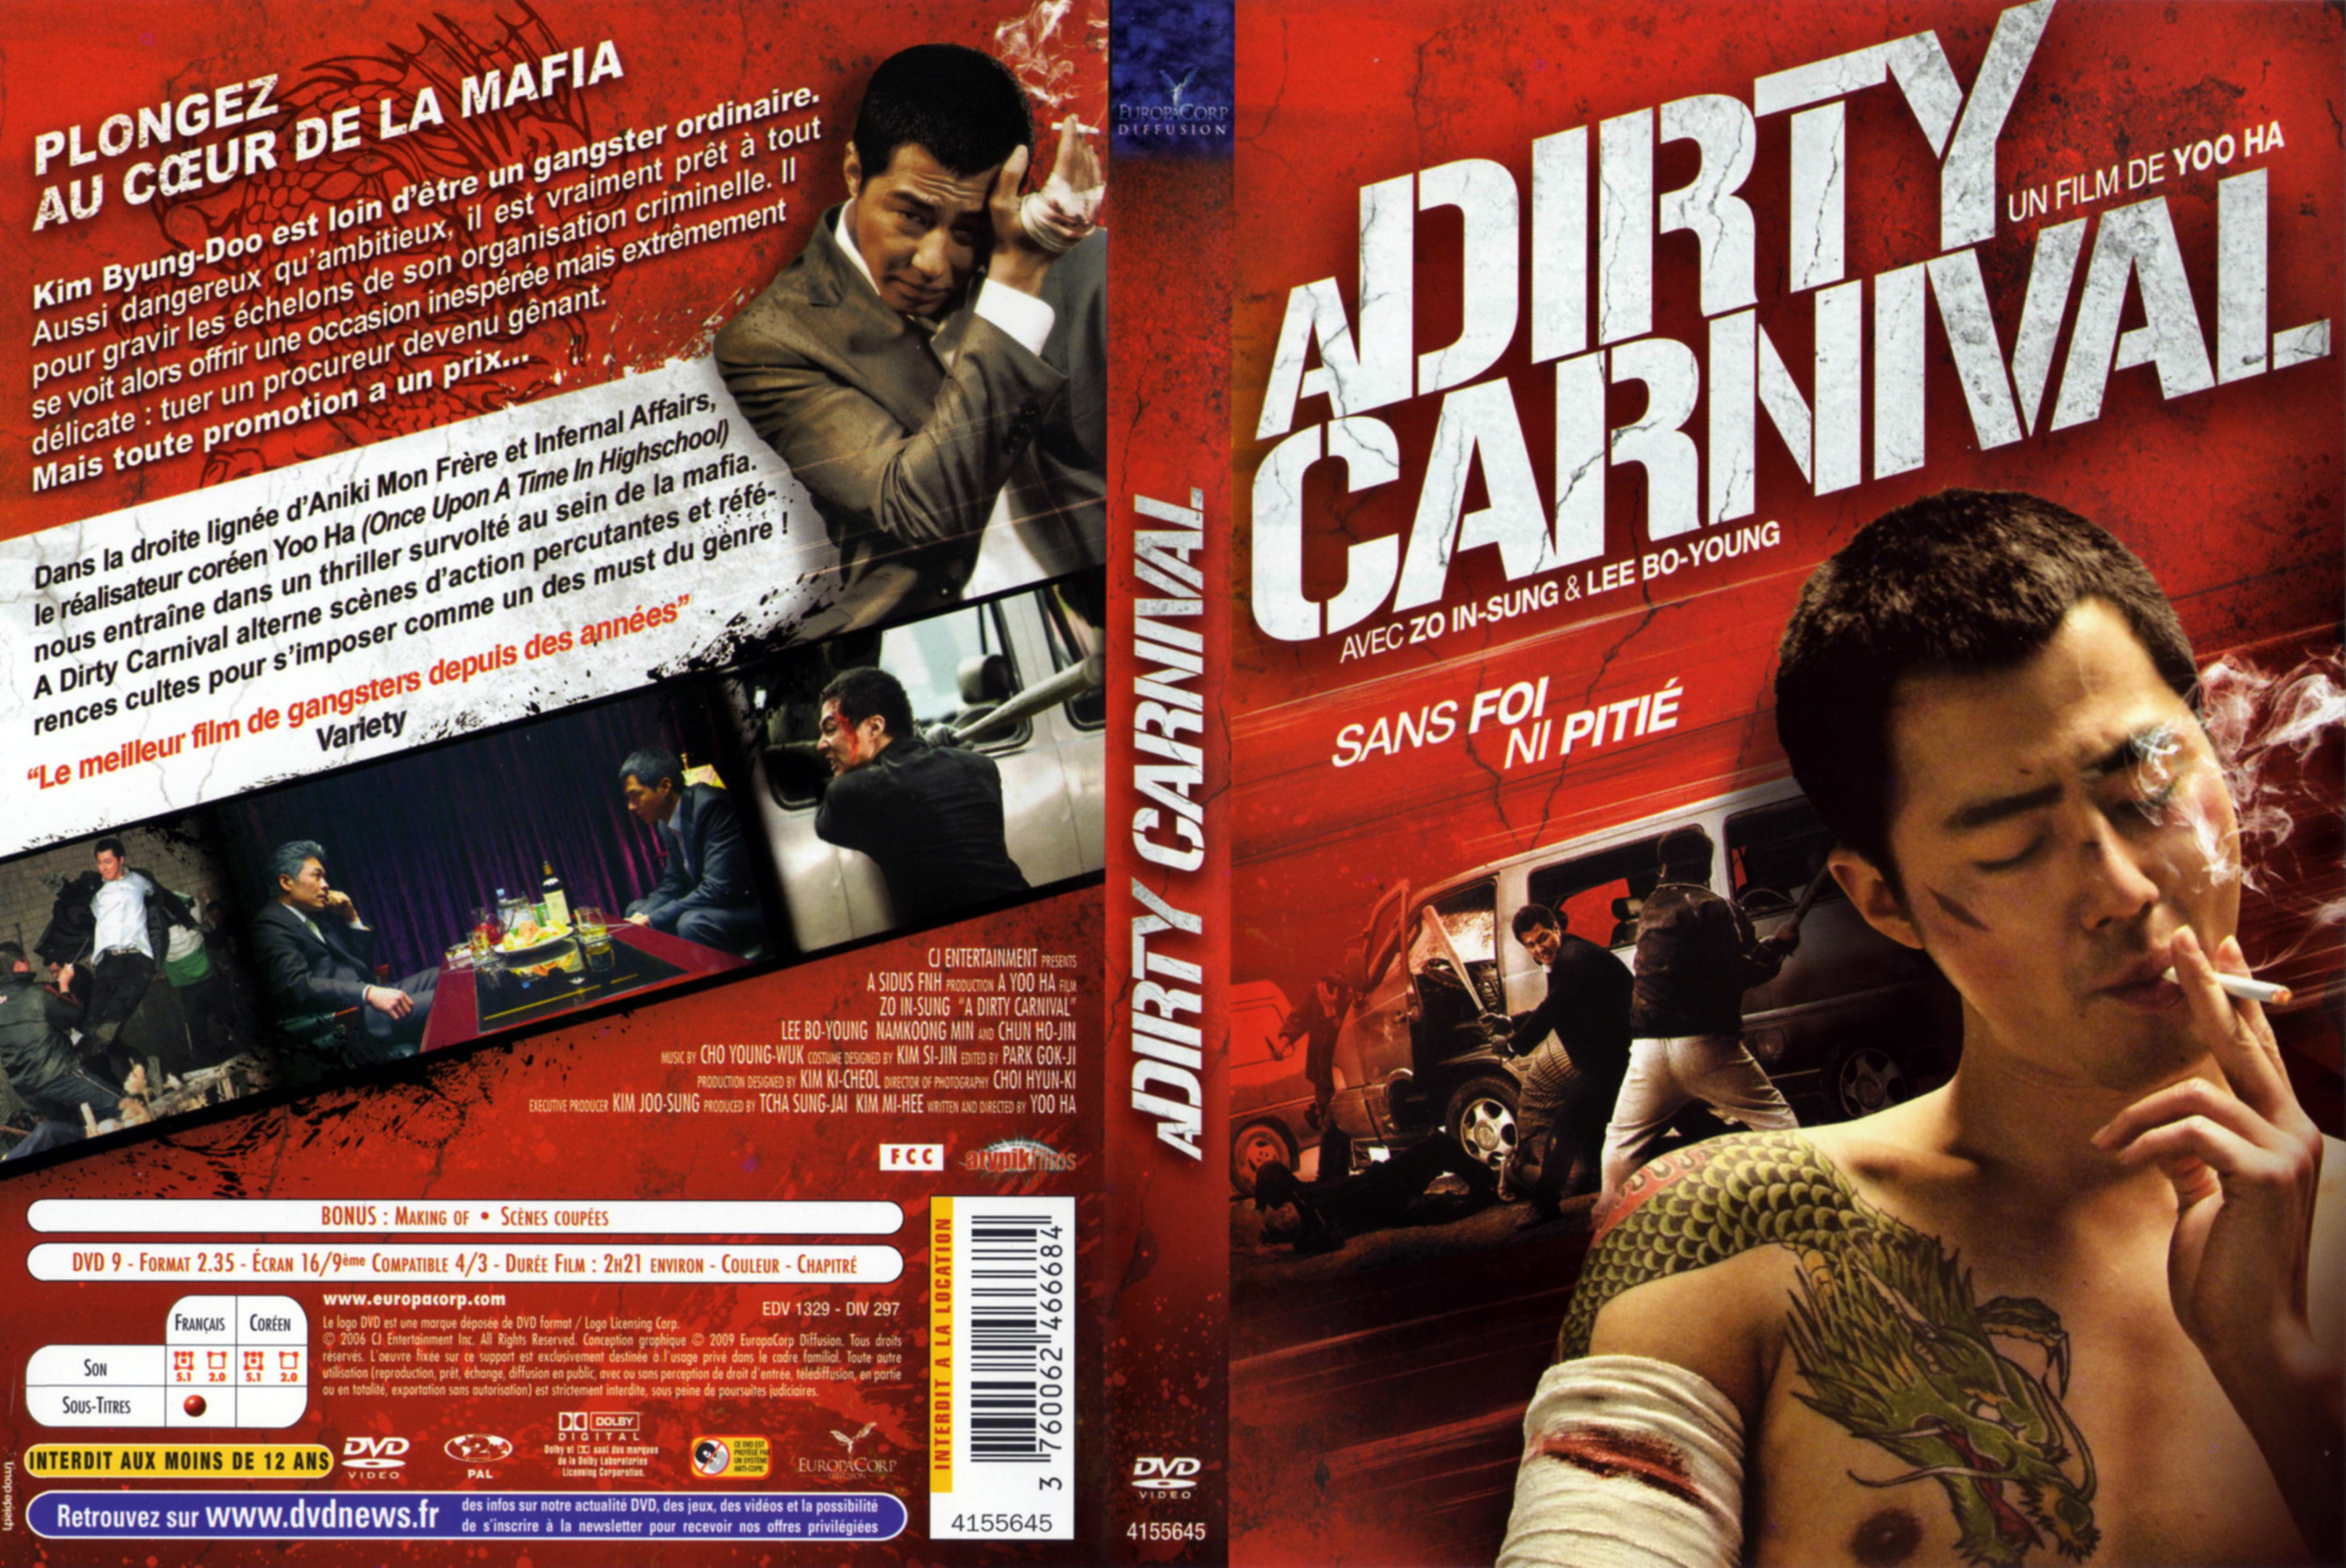 Jaquette DVD A dirty carnival